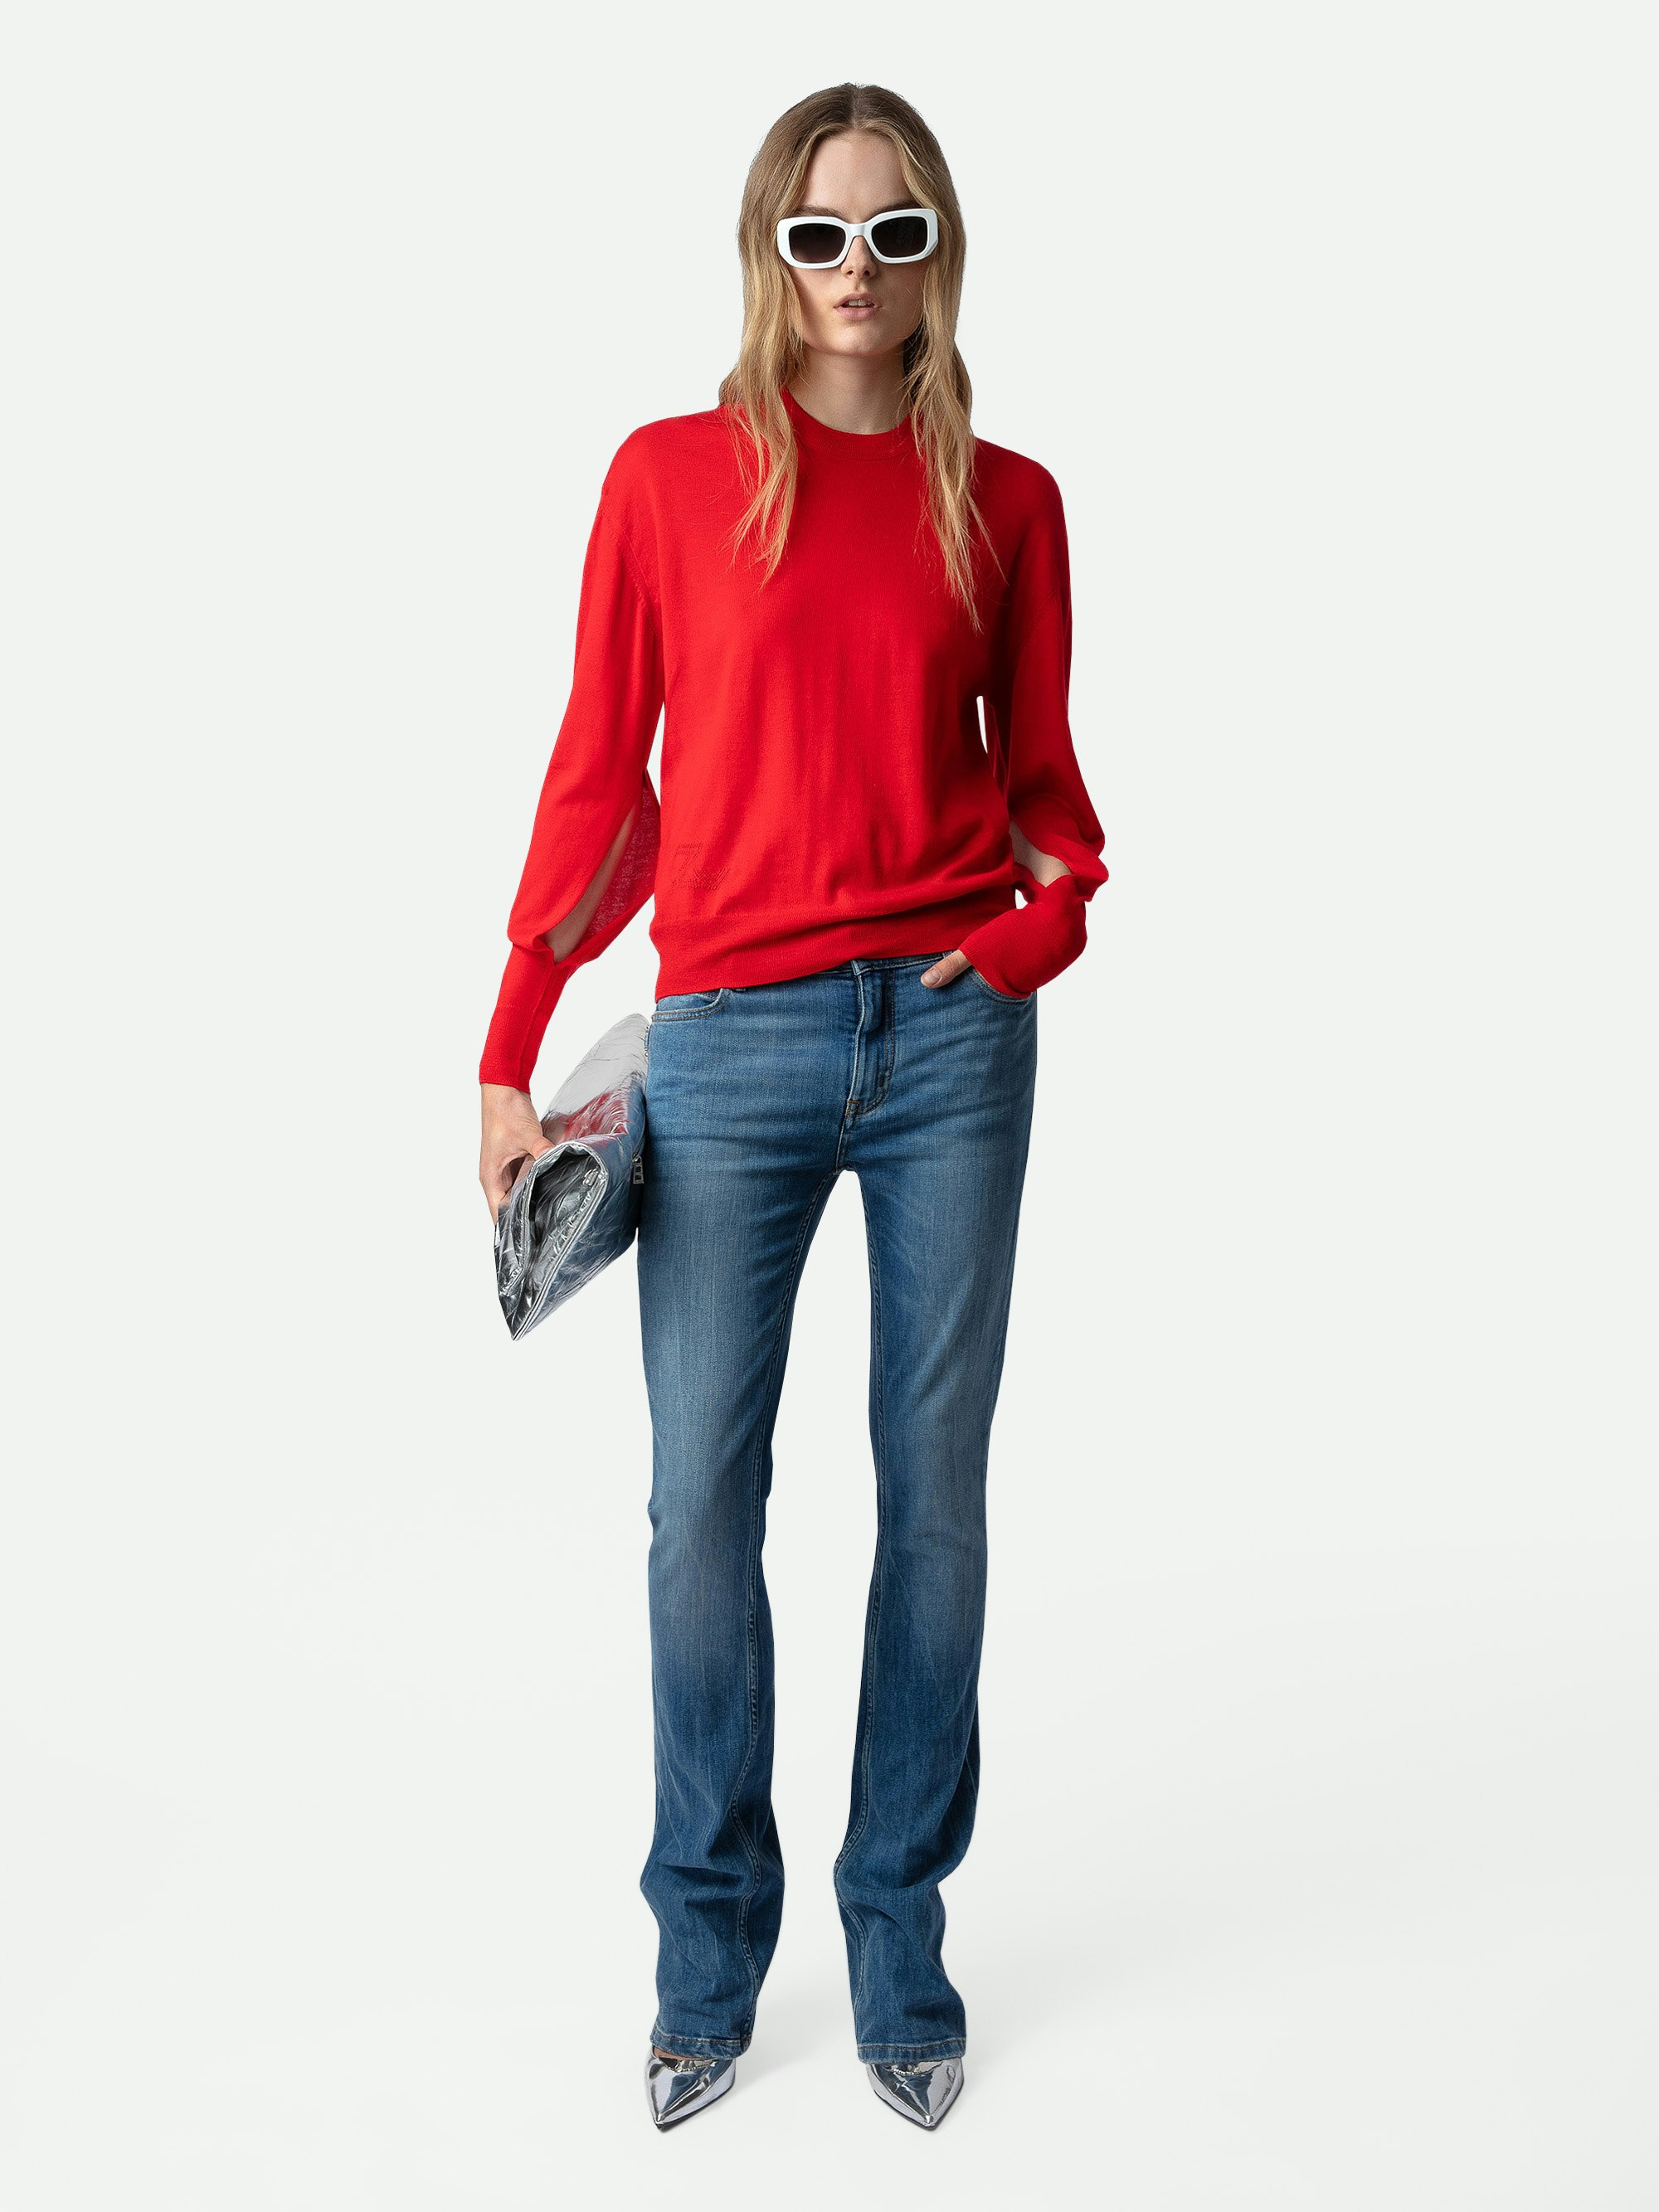 Emmy Jumper 100% Merino Wool - Red 100% merino wool round-neck jumper with long sleeves featuring a cut-out.